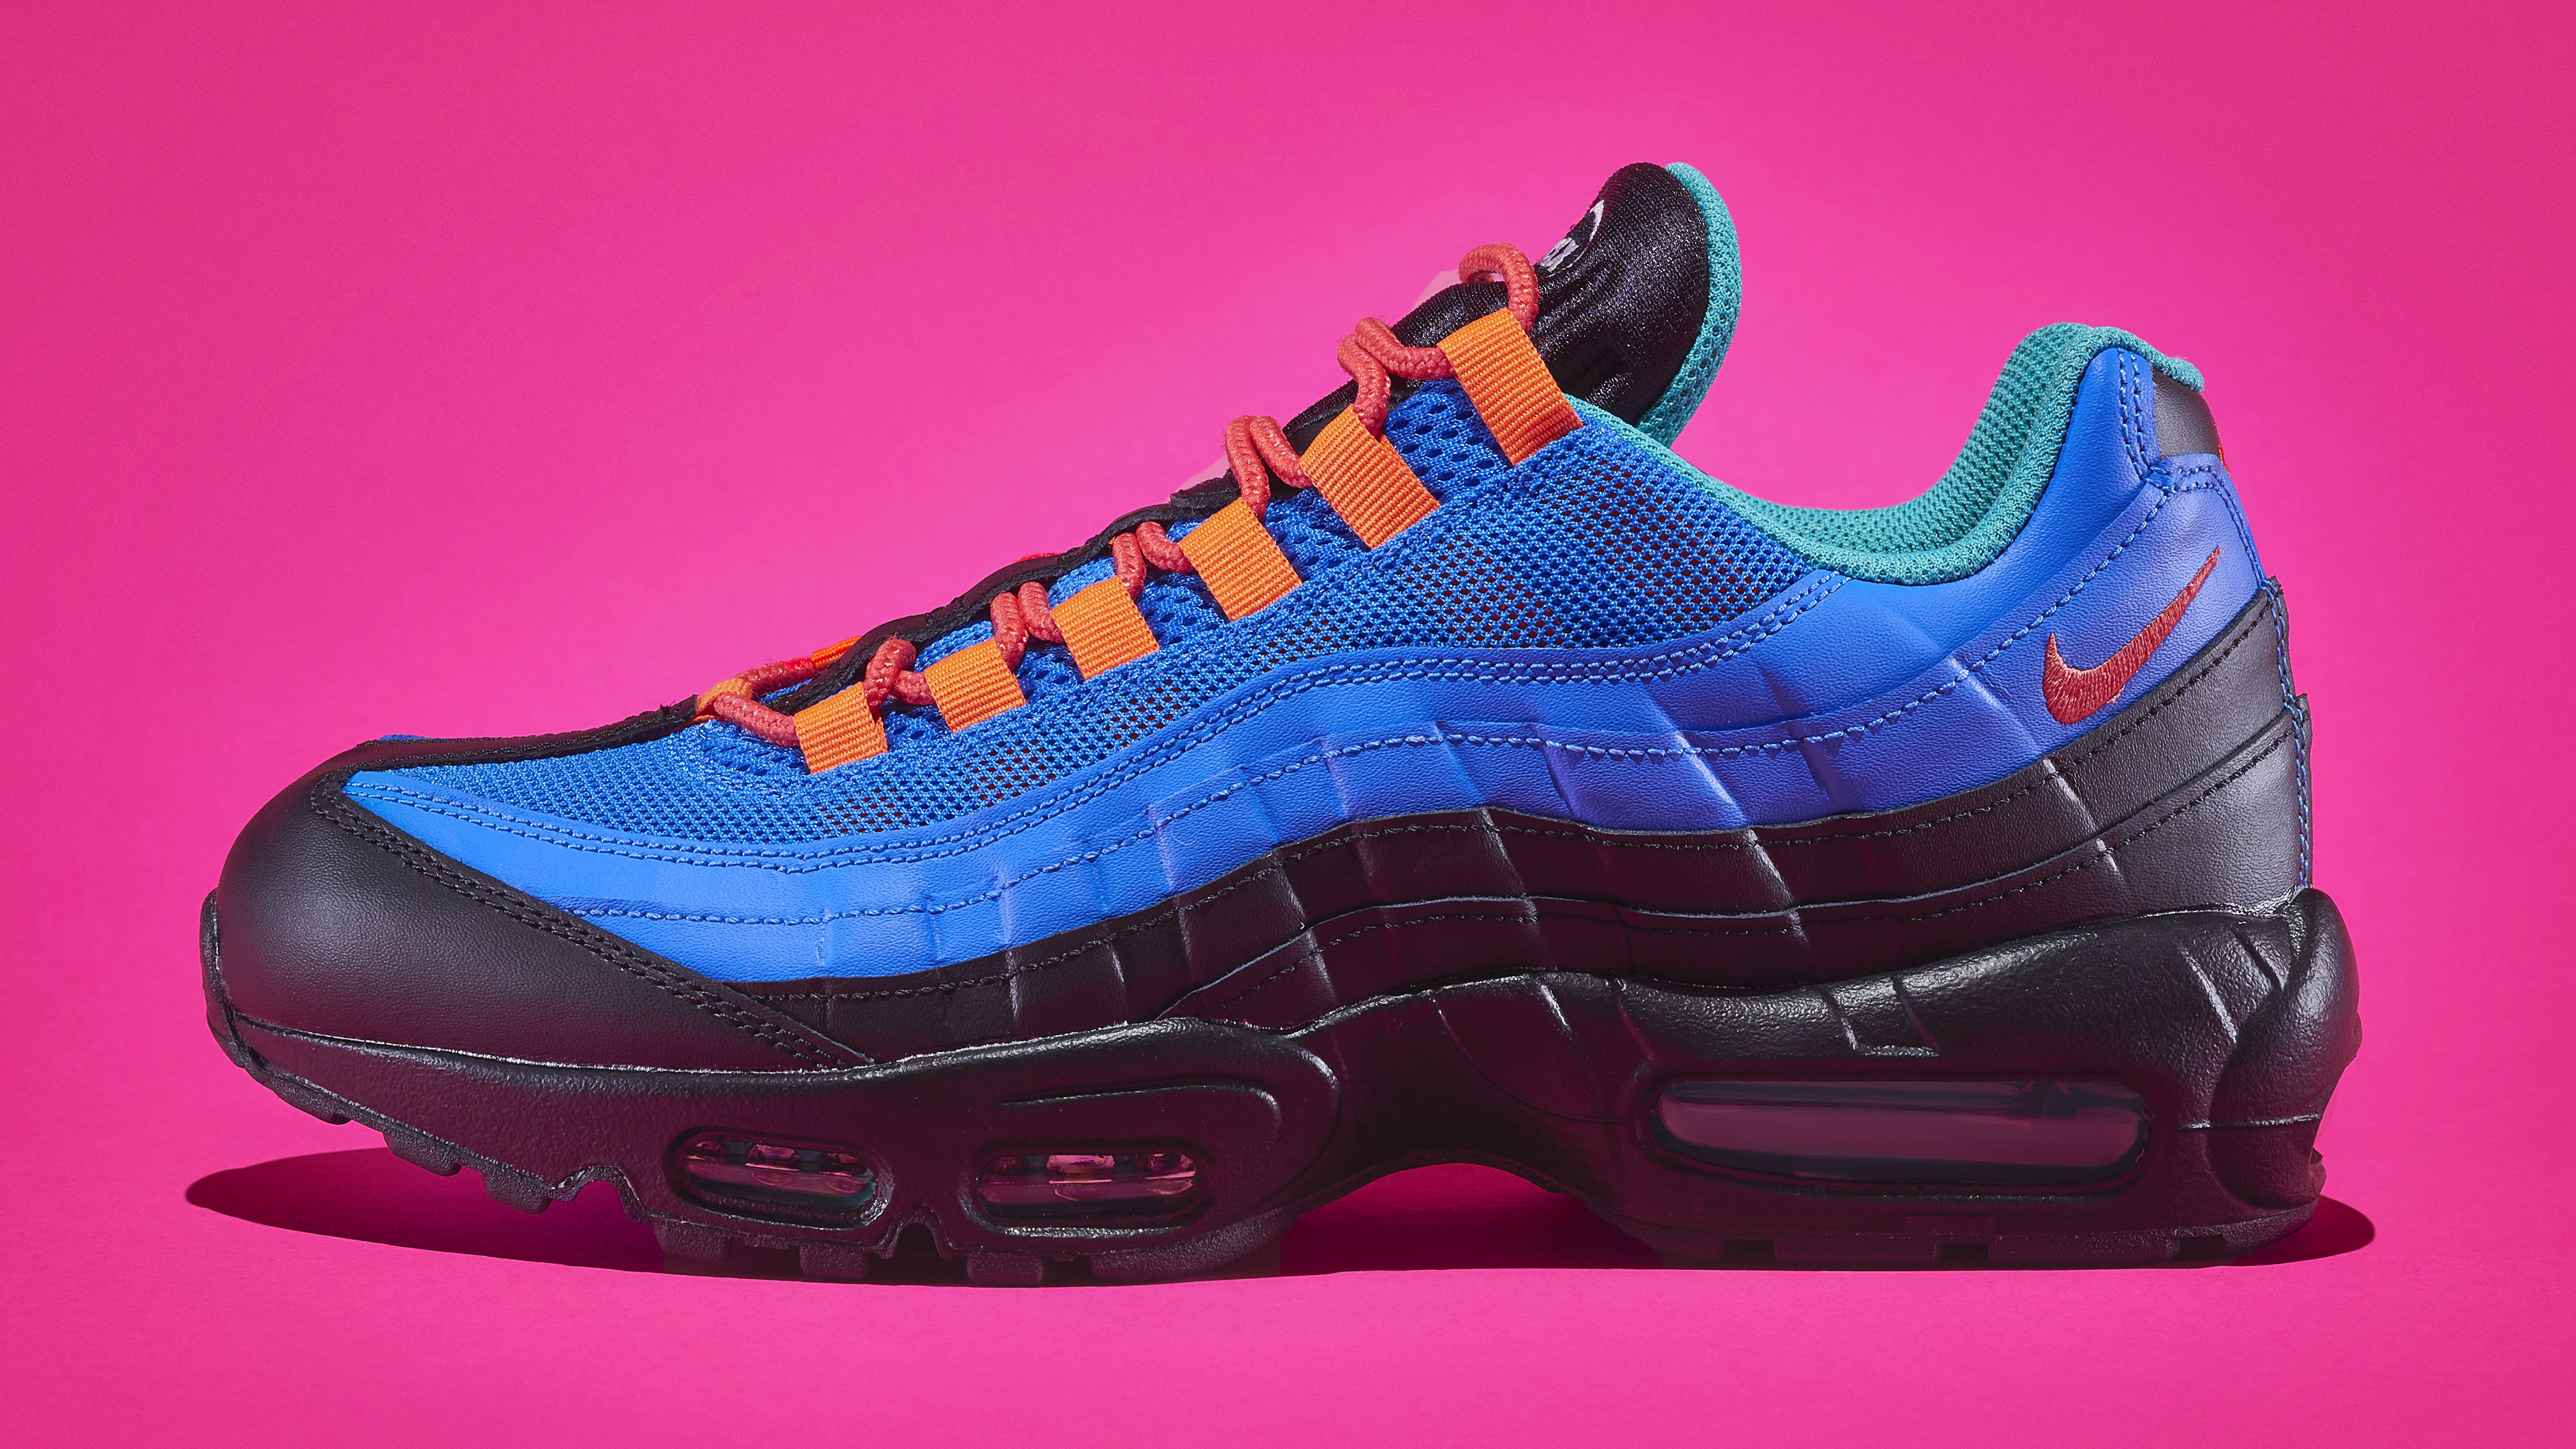 Coral Studios x Nike Air Max 95 V2 Release Date April 2021 | Sole Collector